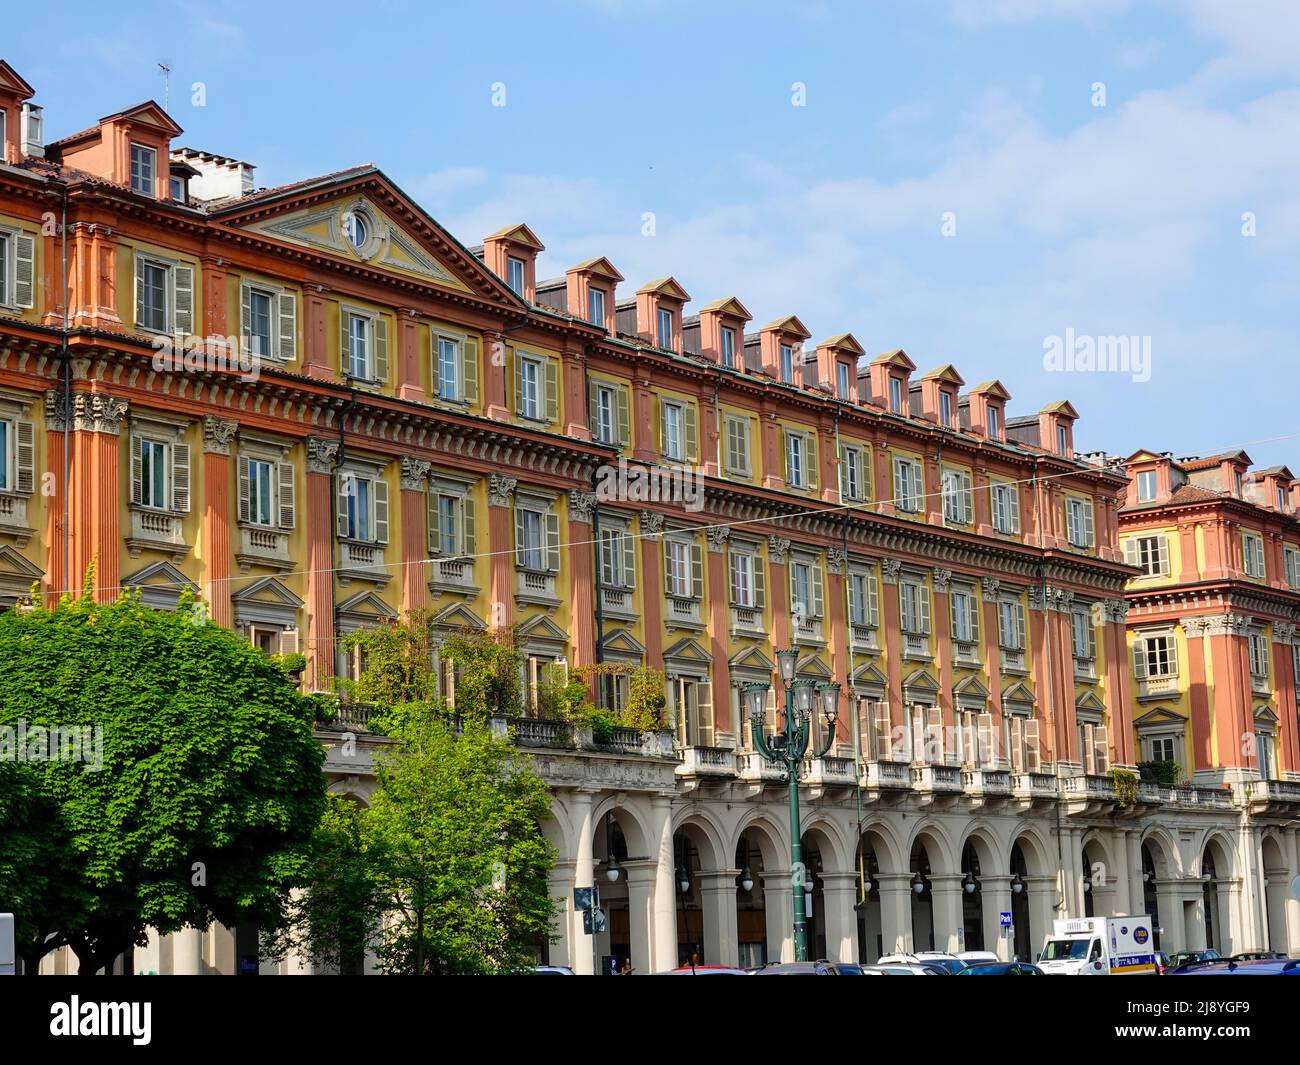 Typical architecture in the center of old, historic Turin, Italy, with arcade covered walkways. Stock Photo